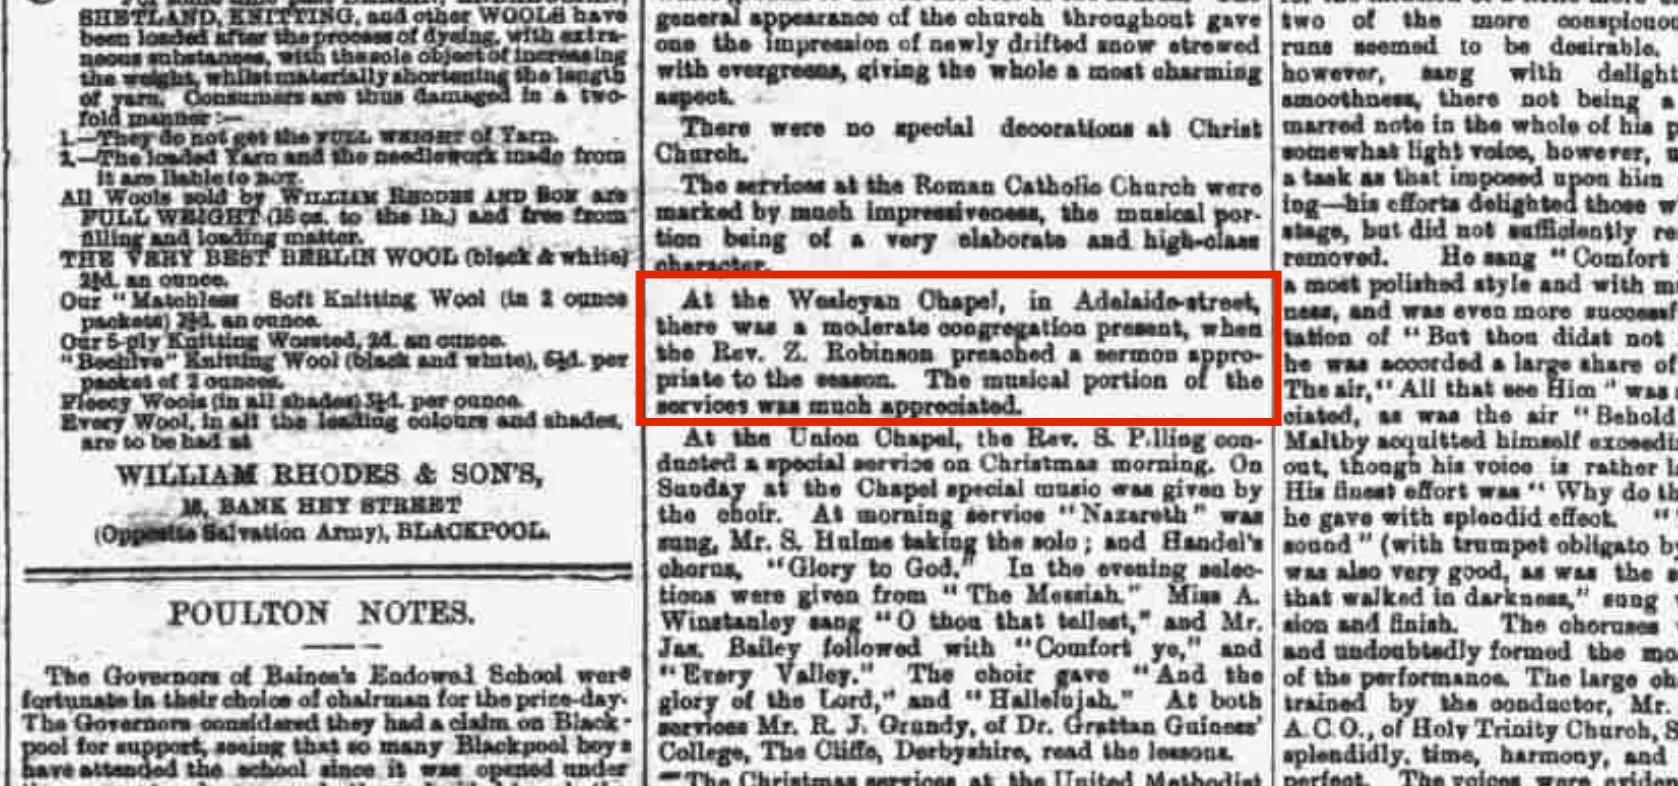 1888 newspaper cutting about a service at Adelaide Street Methodist Church